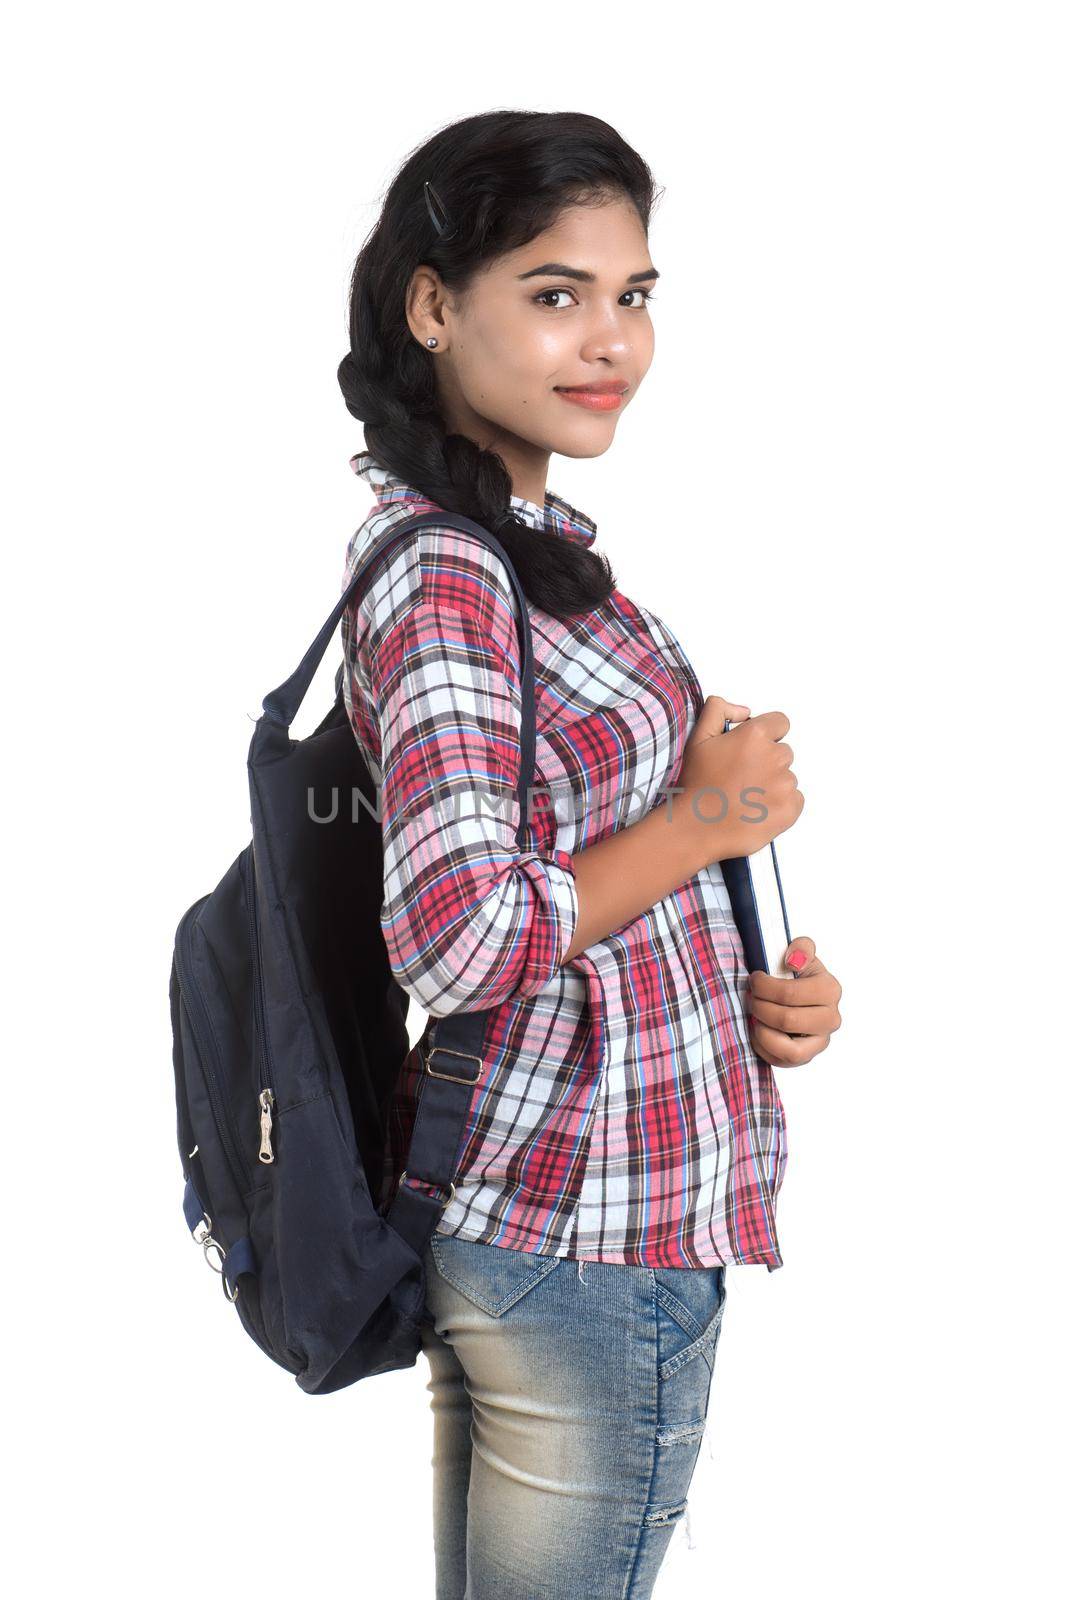 young Indian woman with backpack standing and holding notebooks, posing on a white background. by DipakShelare